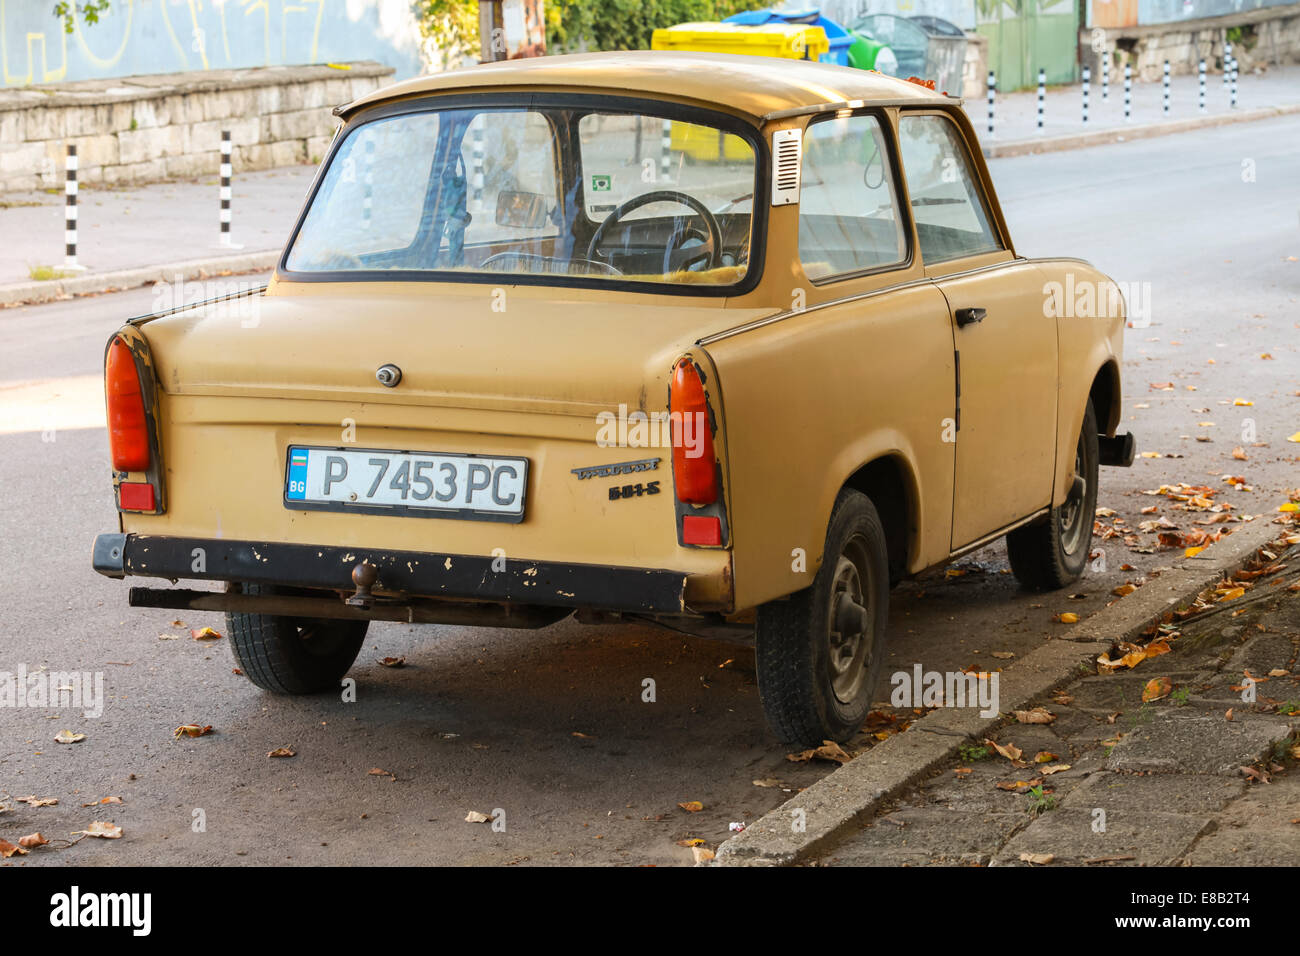 RUSE, BULGARIA - SEPTEMBER 29, 2014: Old yellow Trabant 601s car stands parked on a street side. It was the most common vehicle Stock Photo